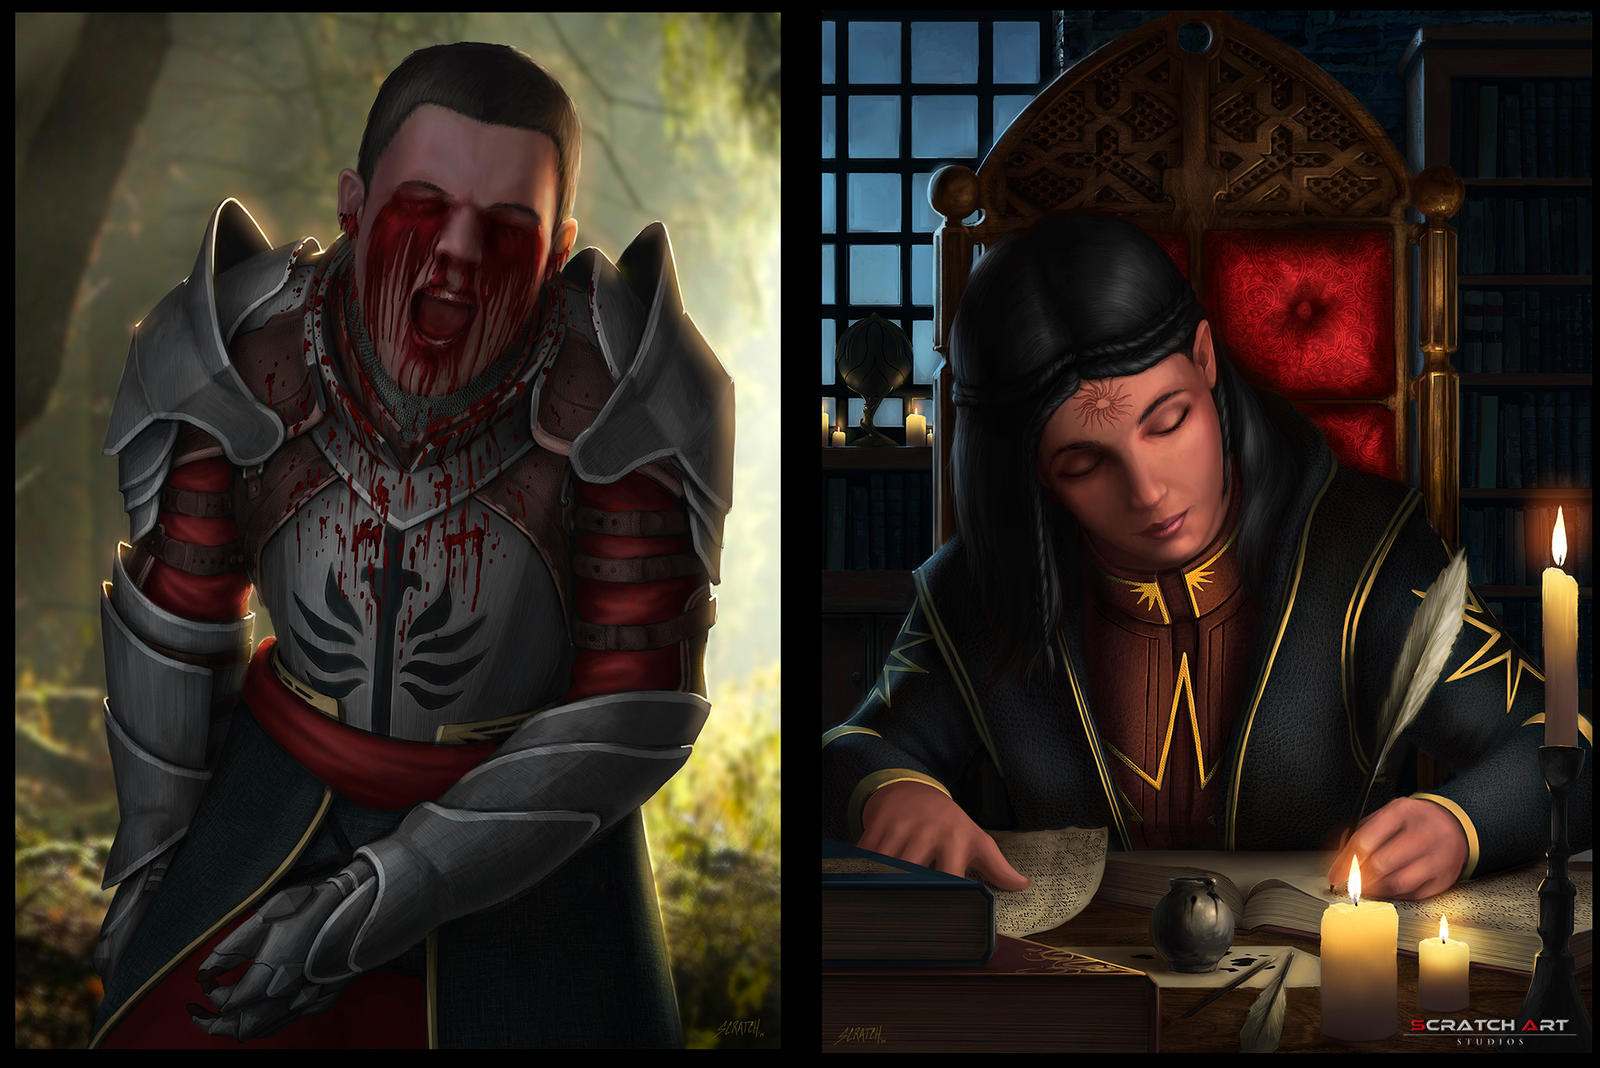 dragon_age_rpg_by_therealscratch-d7si7wi